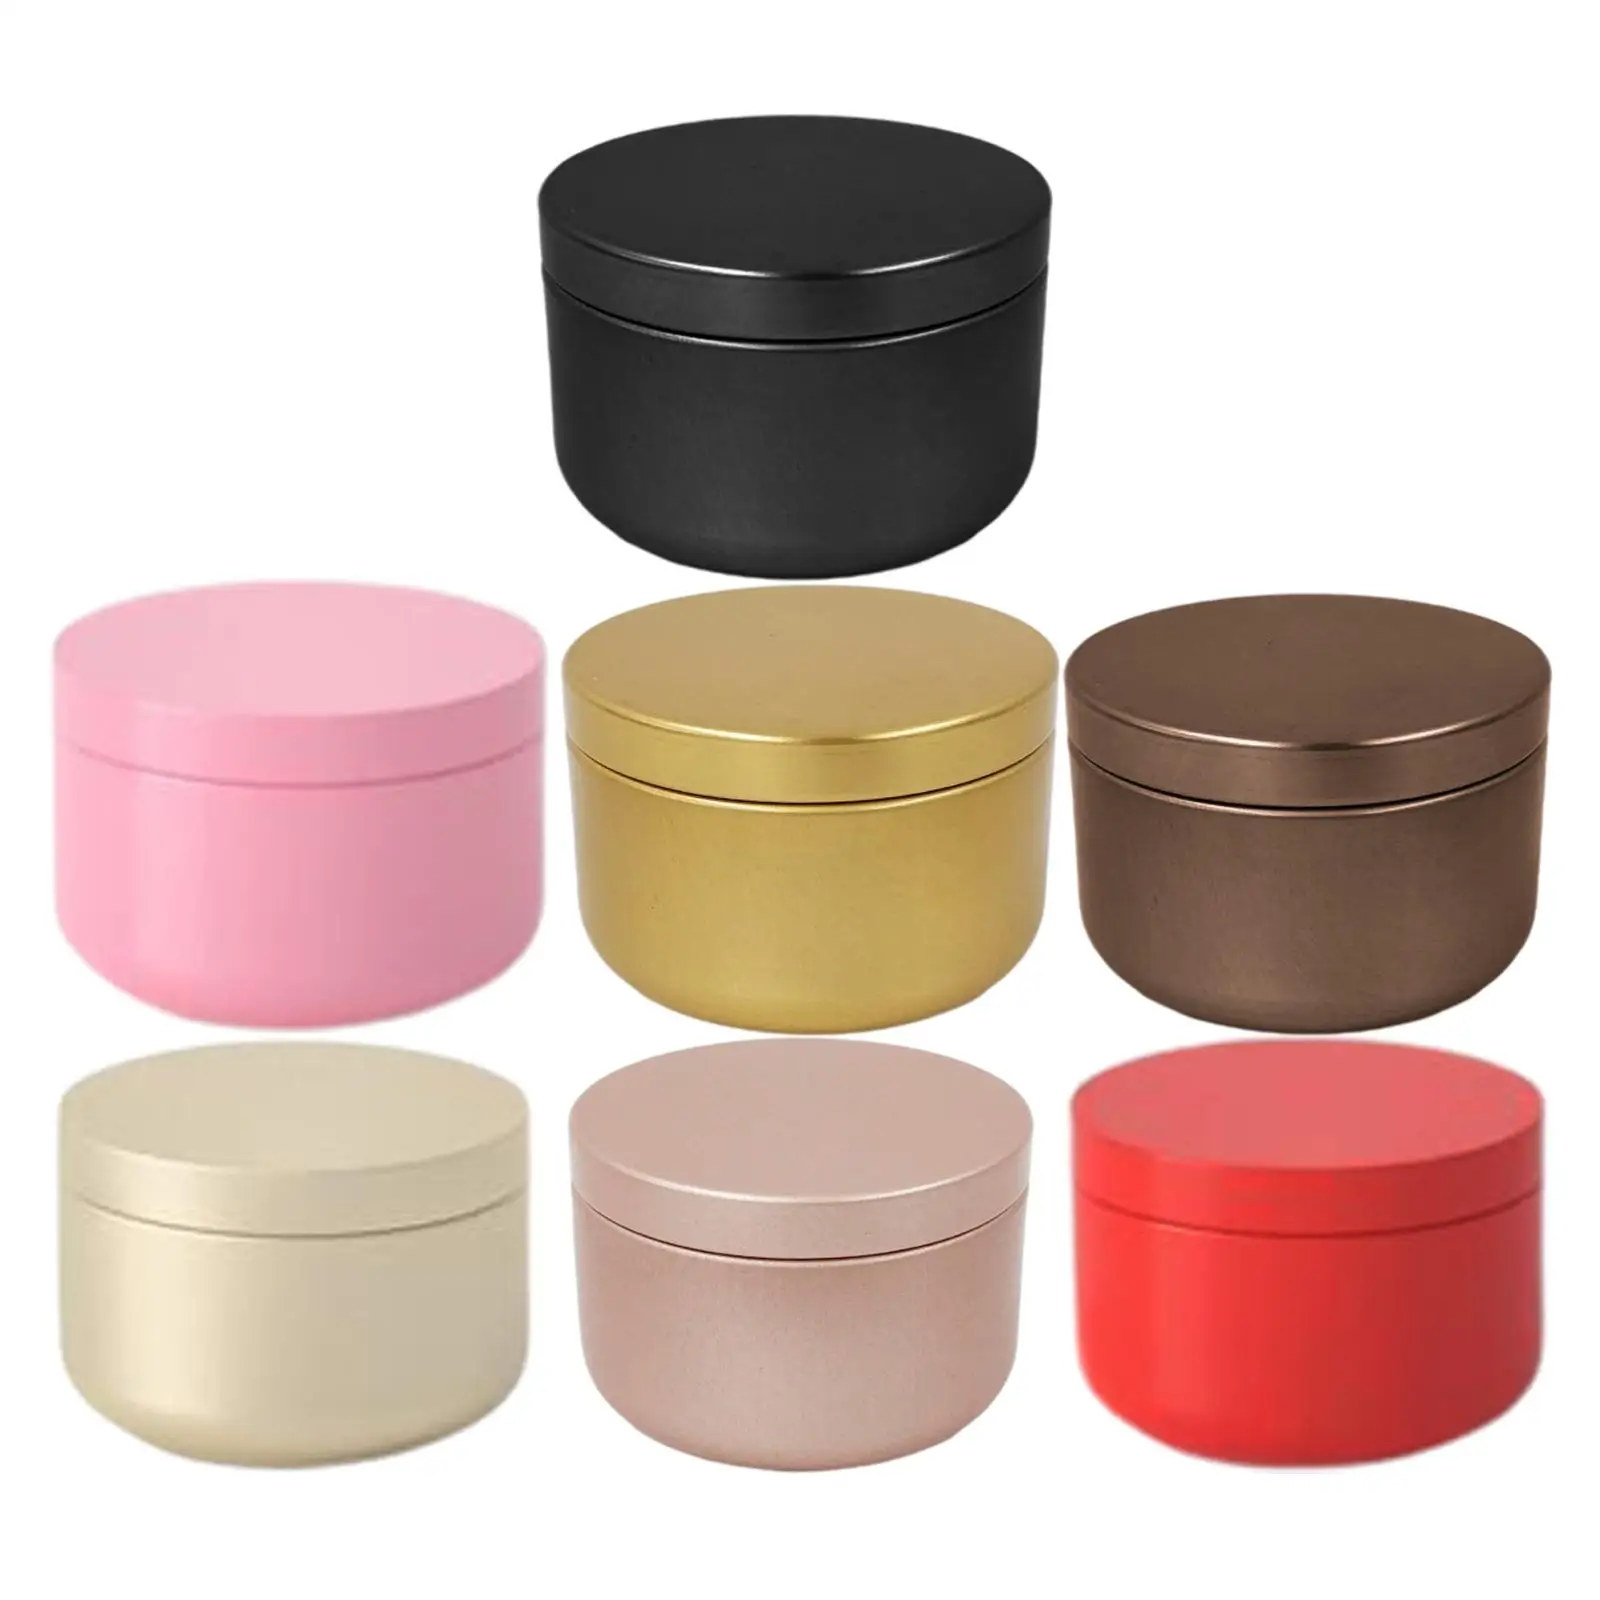 12 Pieces Small Tea Cans 50ml Wear Resistant Anti Drop with Buckle Reusable Containers for Cosmetics Sweets Travel Men Women